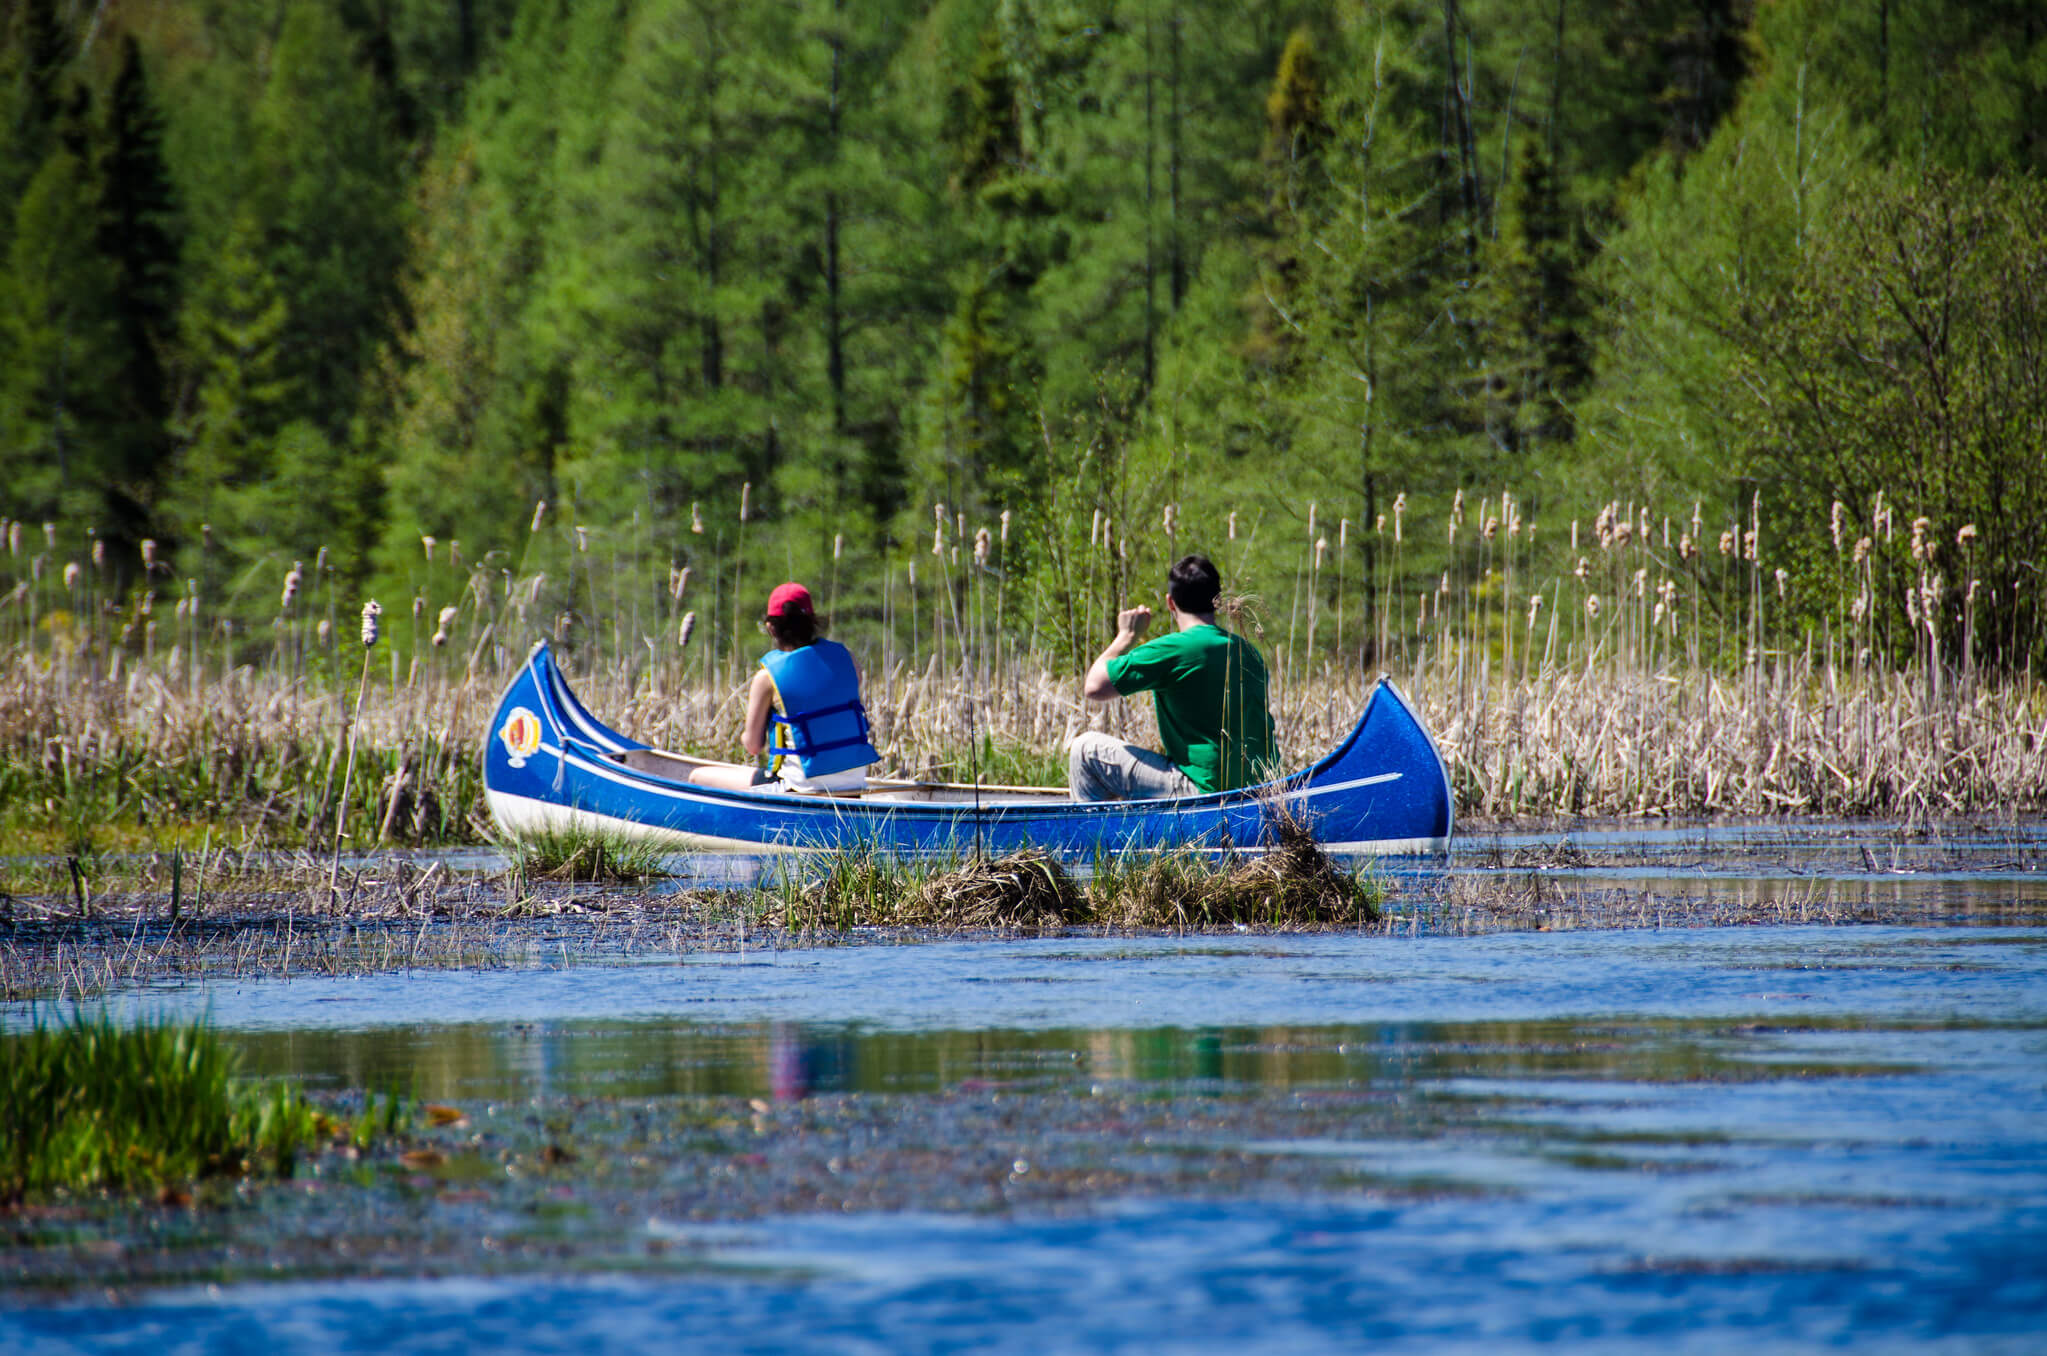 Canoers enjoy the water. Outdoor recreation increased during the pandemic, highlighting the need for more investment in the Knowles-Nelson Stewardship Program.